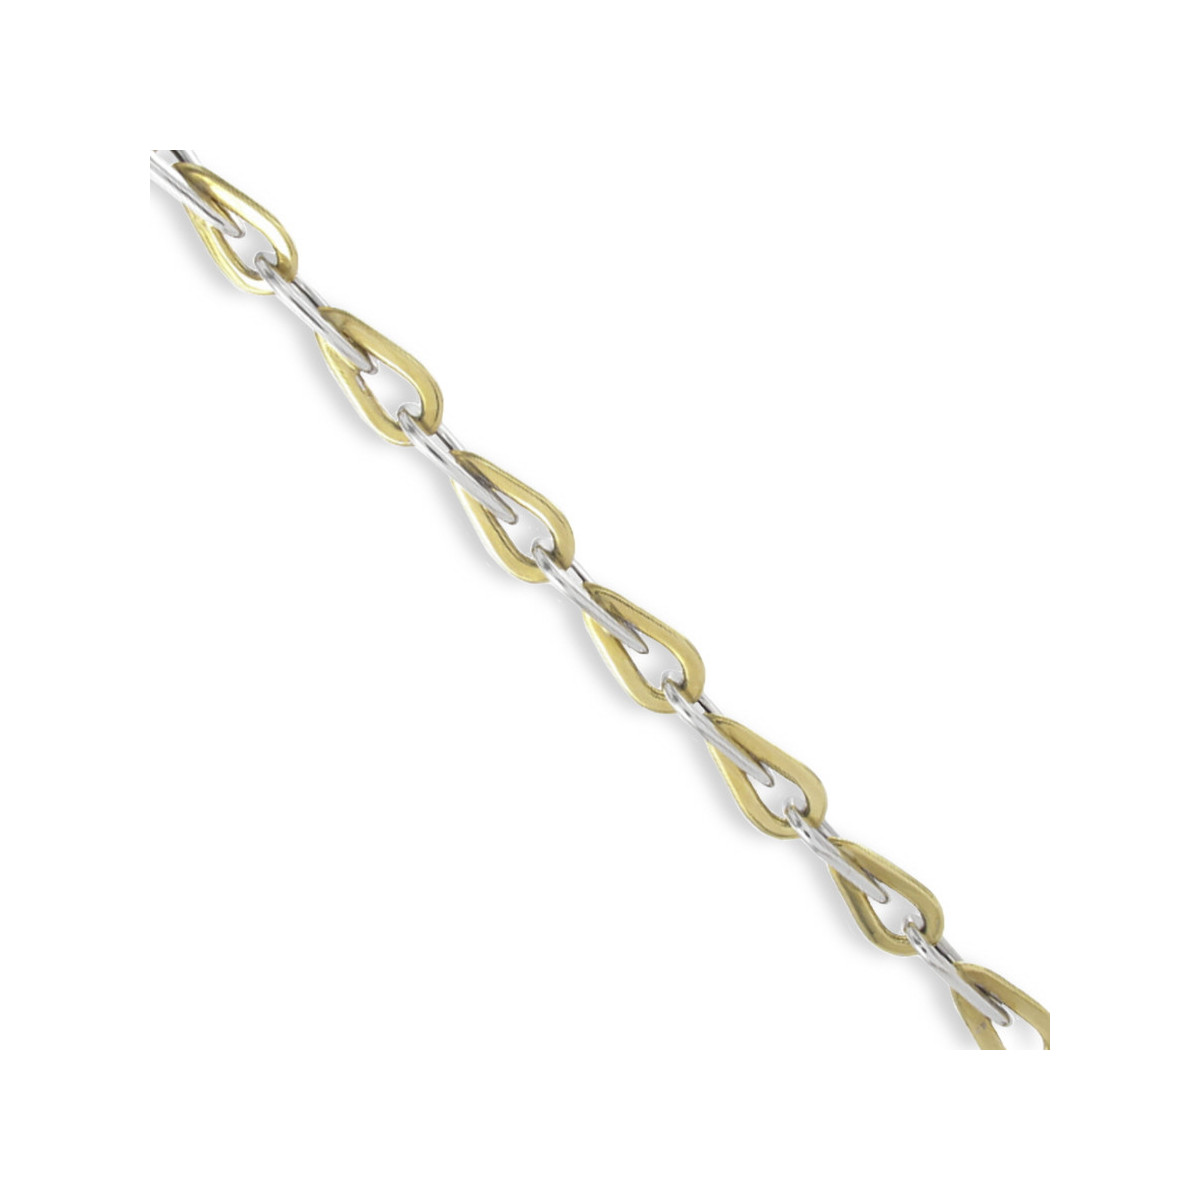 YELLOW GOLD AND WHITE GOLD BRACELET